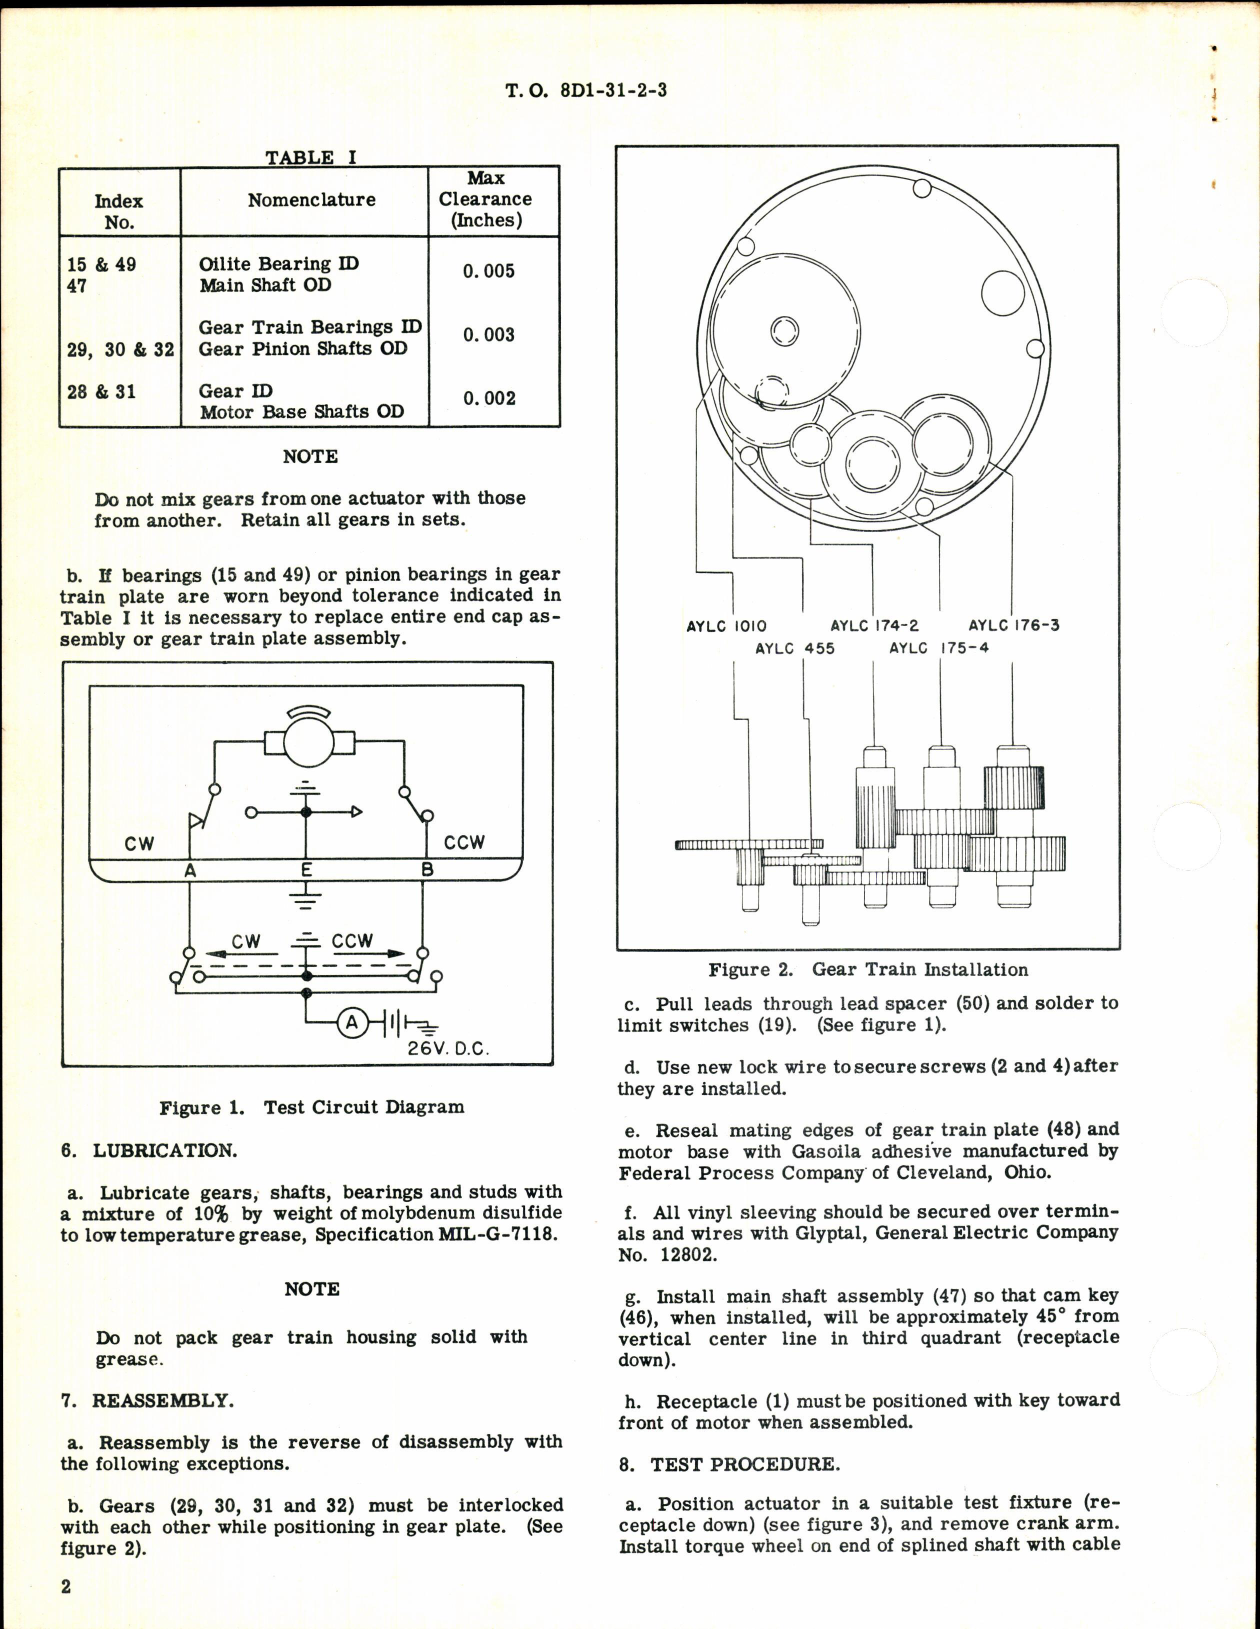 Sample page 2 from AirCorps Library document: Instructions w Parts Breakdown Rotary Actuator